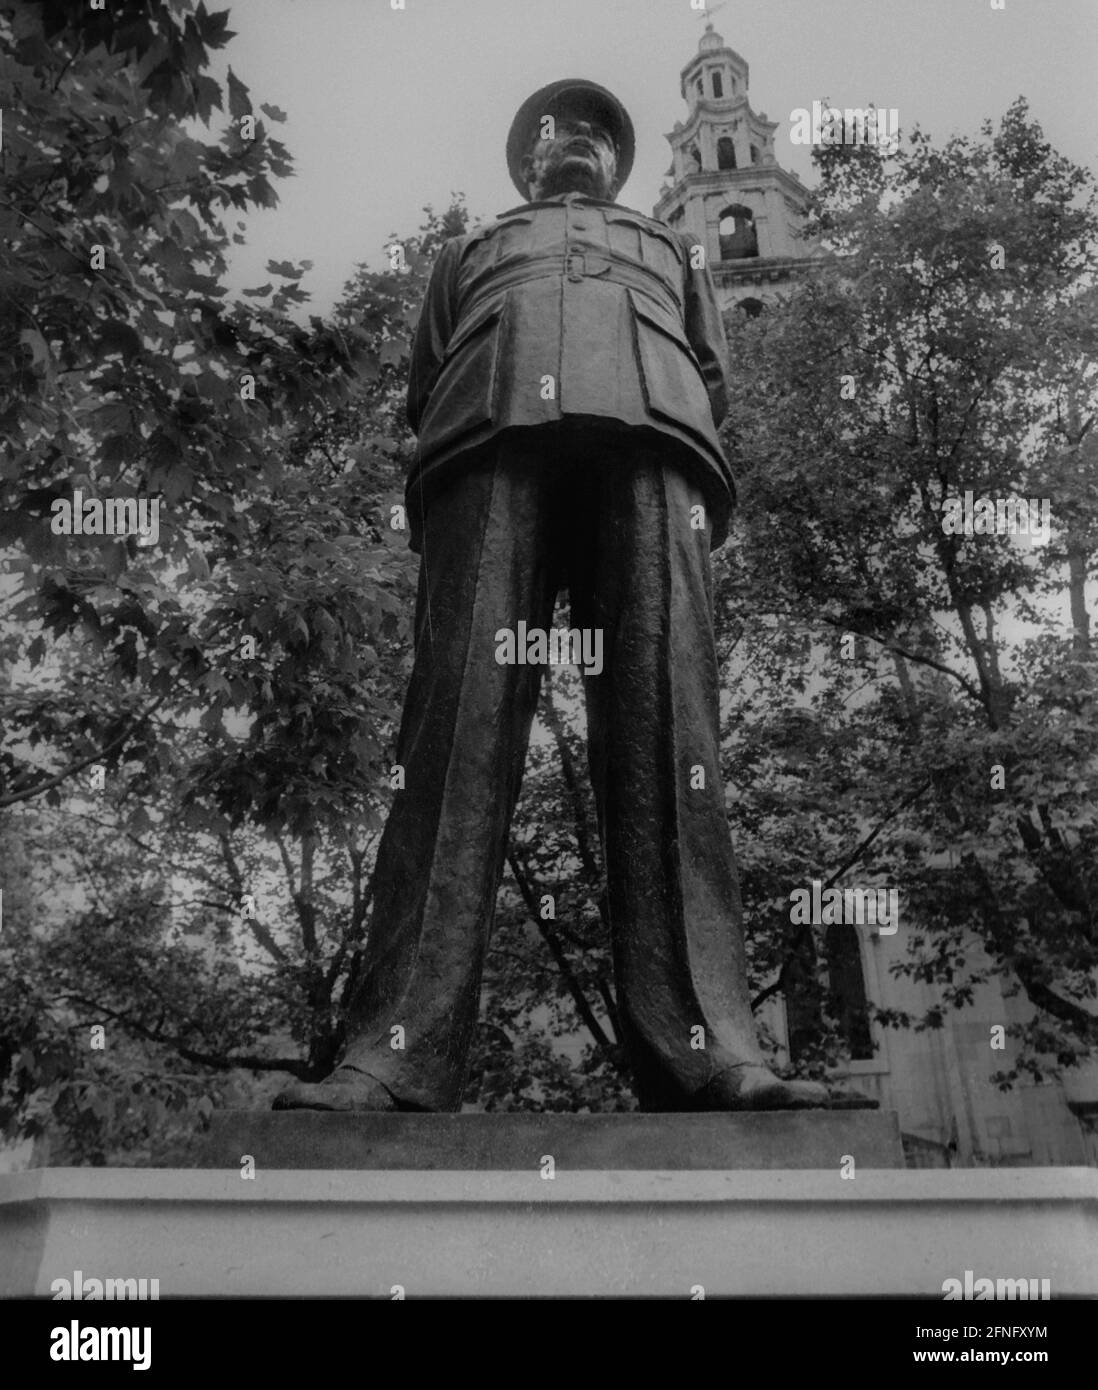 Great Britain / England / London / 5 / 1992 City of London. Monument dedicated to Bomber Harris, who organized the air raids on German cities during the last world war. He is responsible for many dead German civilians. // air war / history / war / allies / german victims [automated translation] Stock Photo